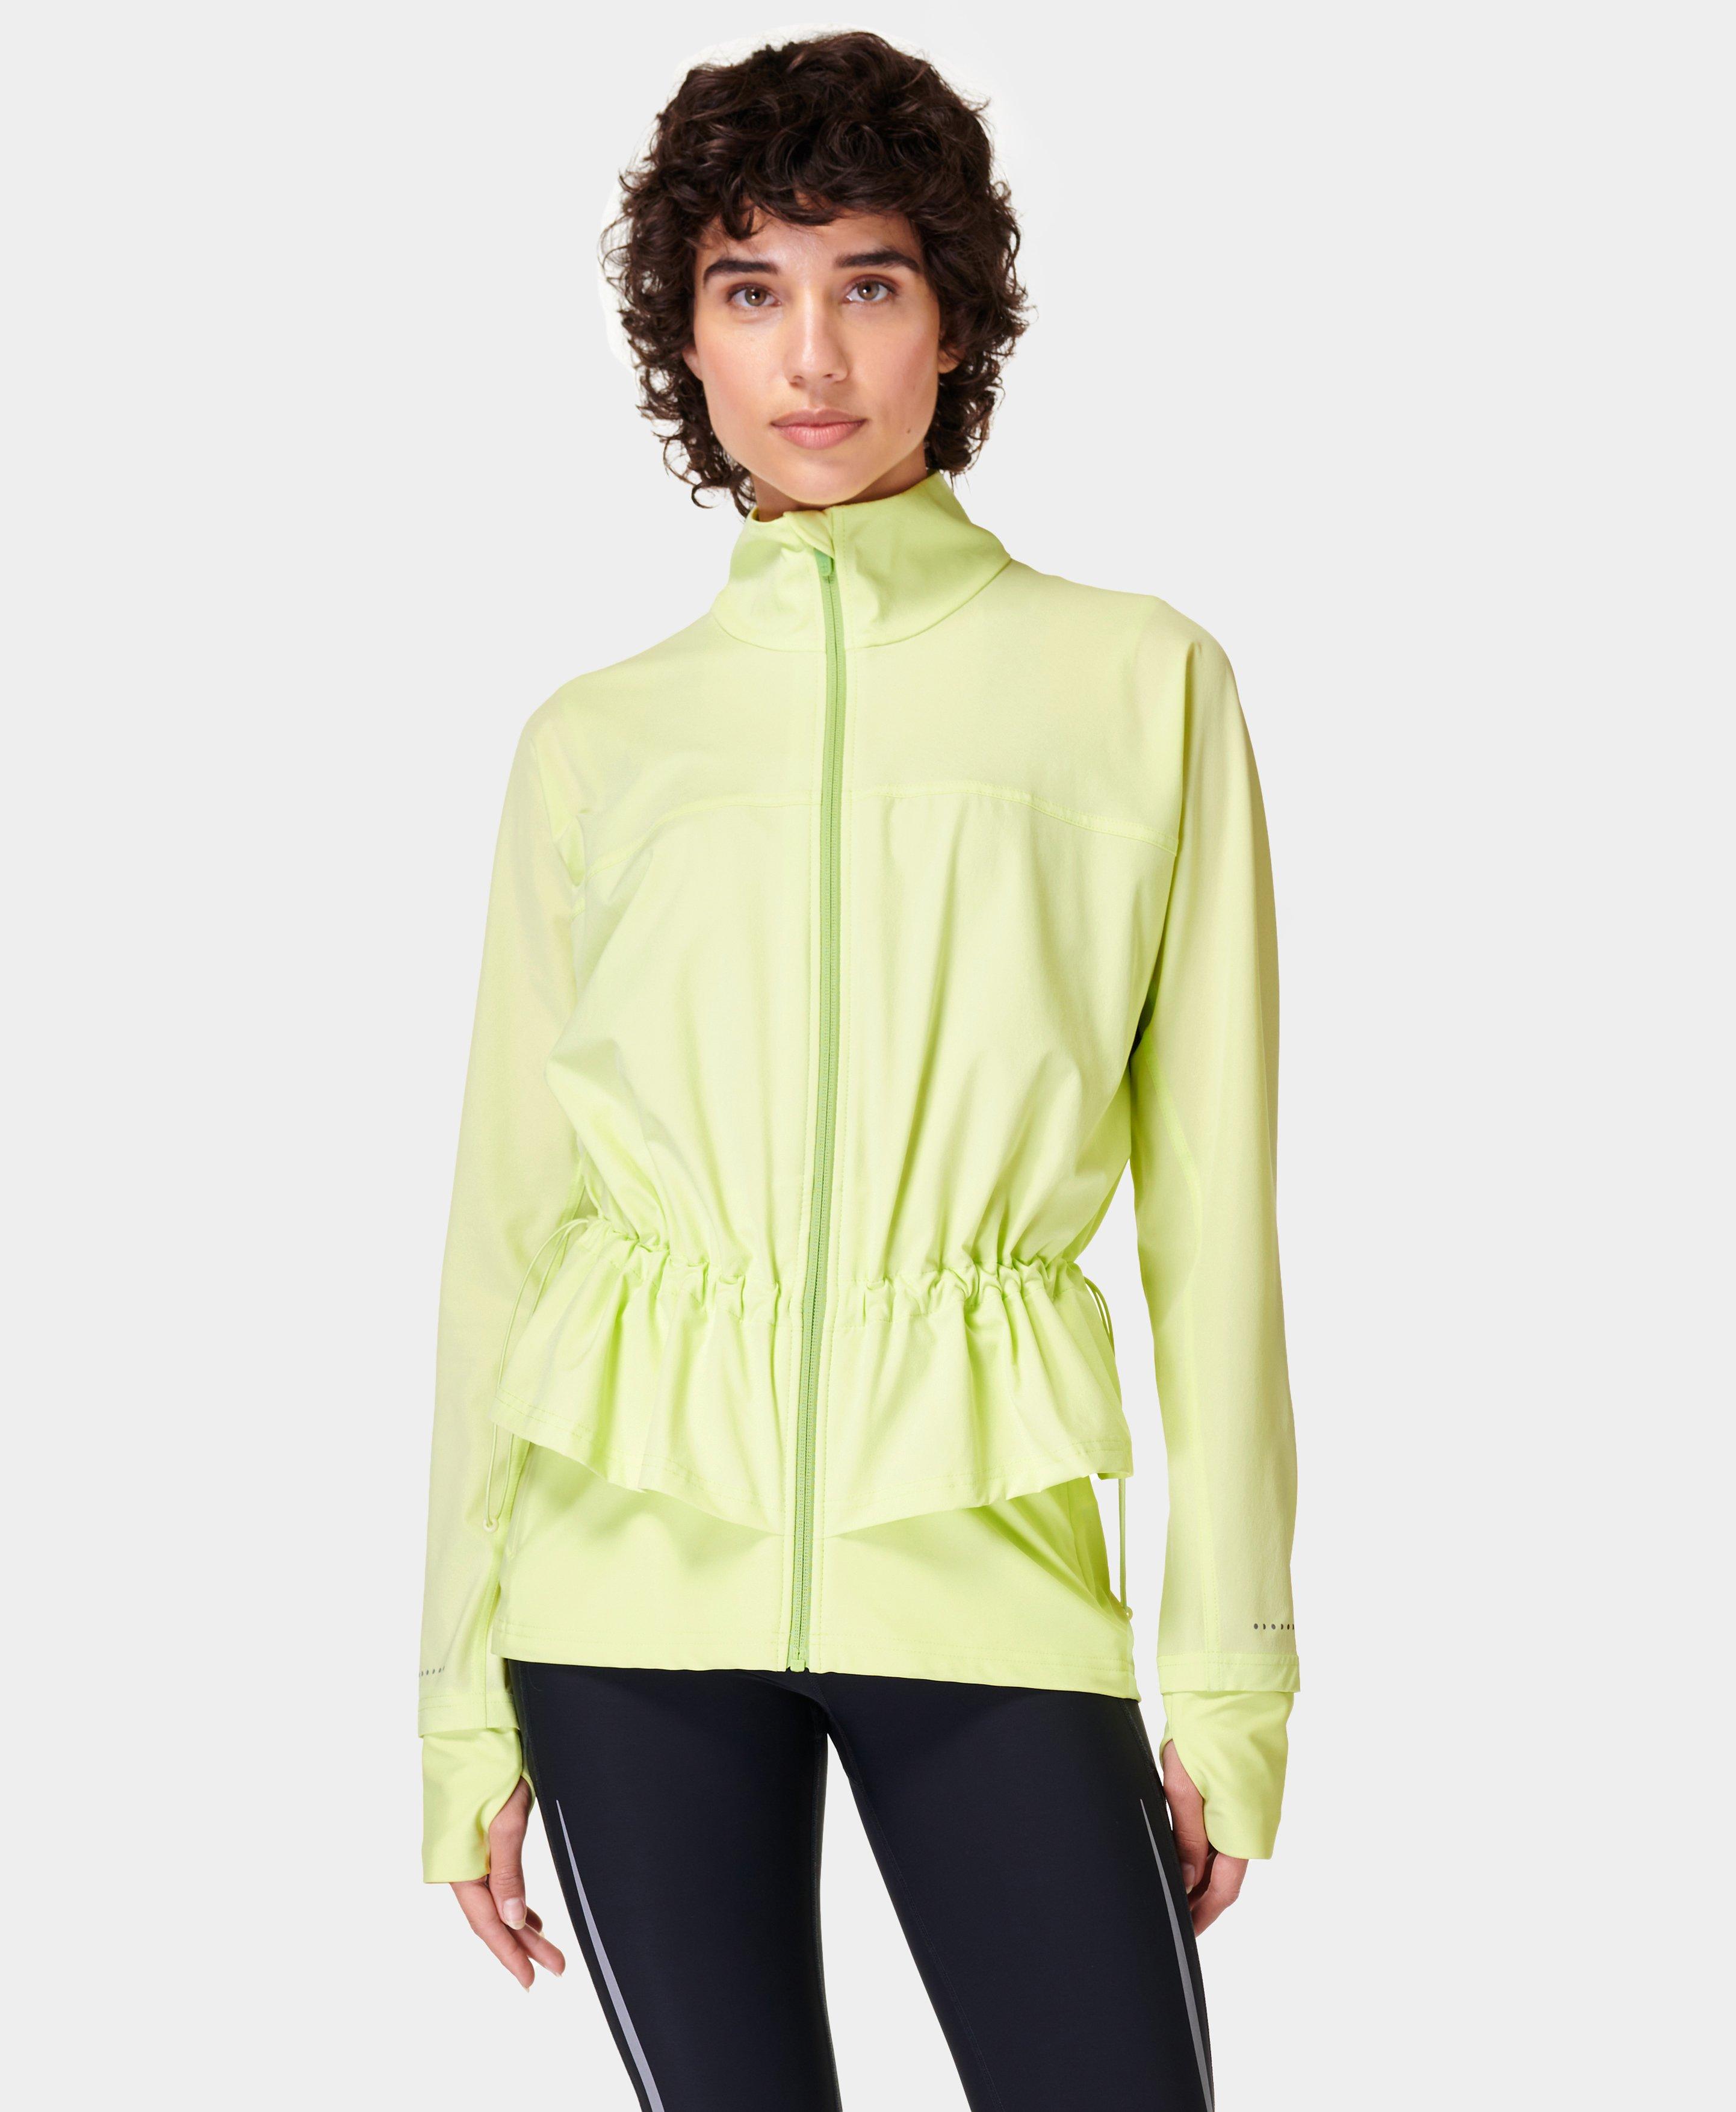 Sweaty Betty Fast Track Thermal Quilted Running Jacket, Mountain Green  (L/BNWOT)